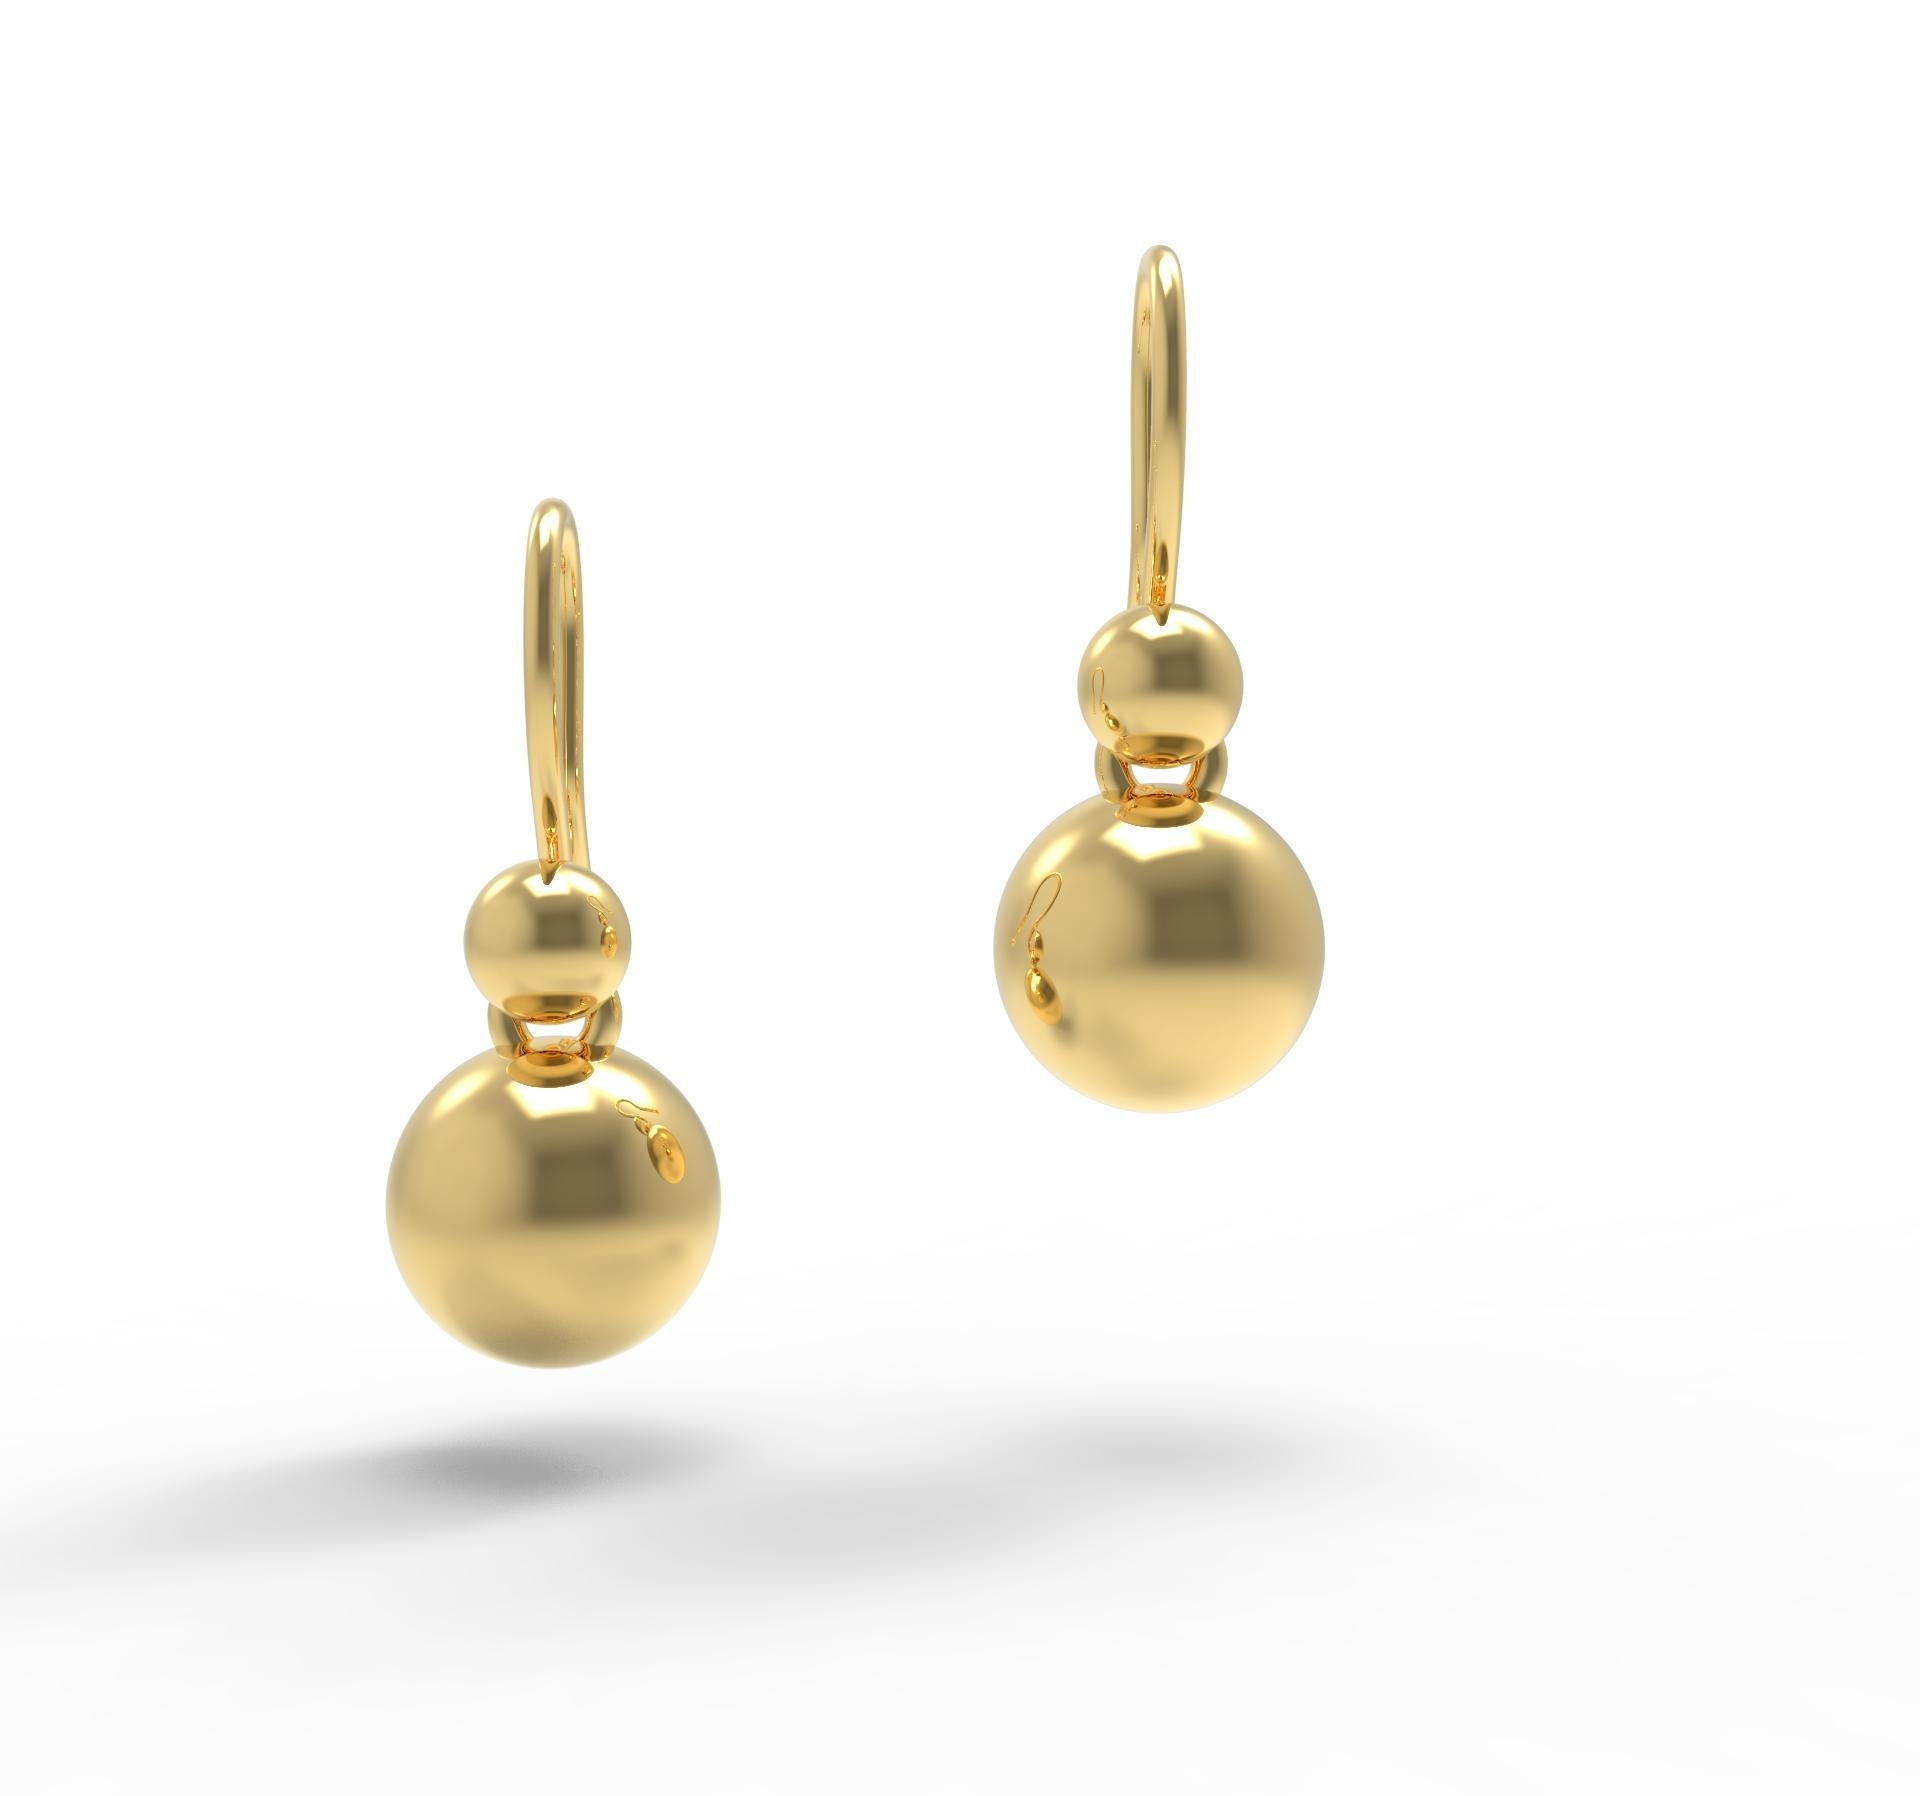 22K Solid Yellow Gold Dangle Earrings by ROMAE Jewelry Inspired by an Ancient Roman Design. Our gorgeous 